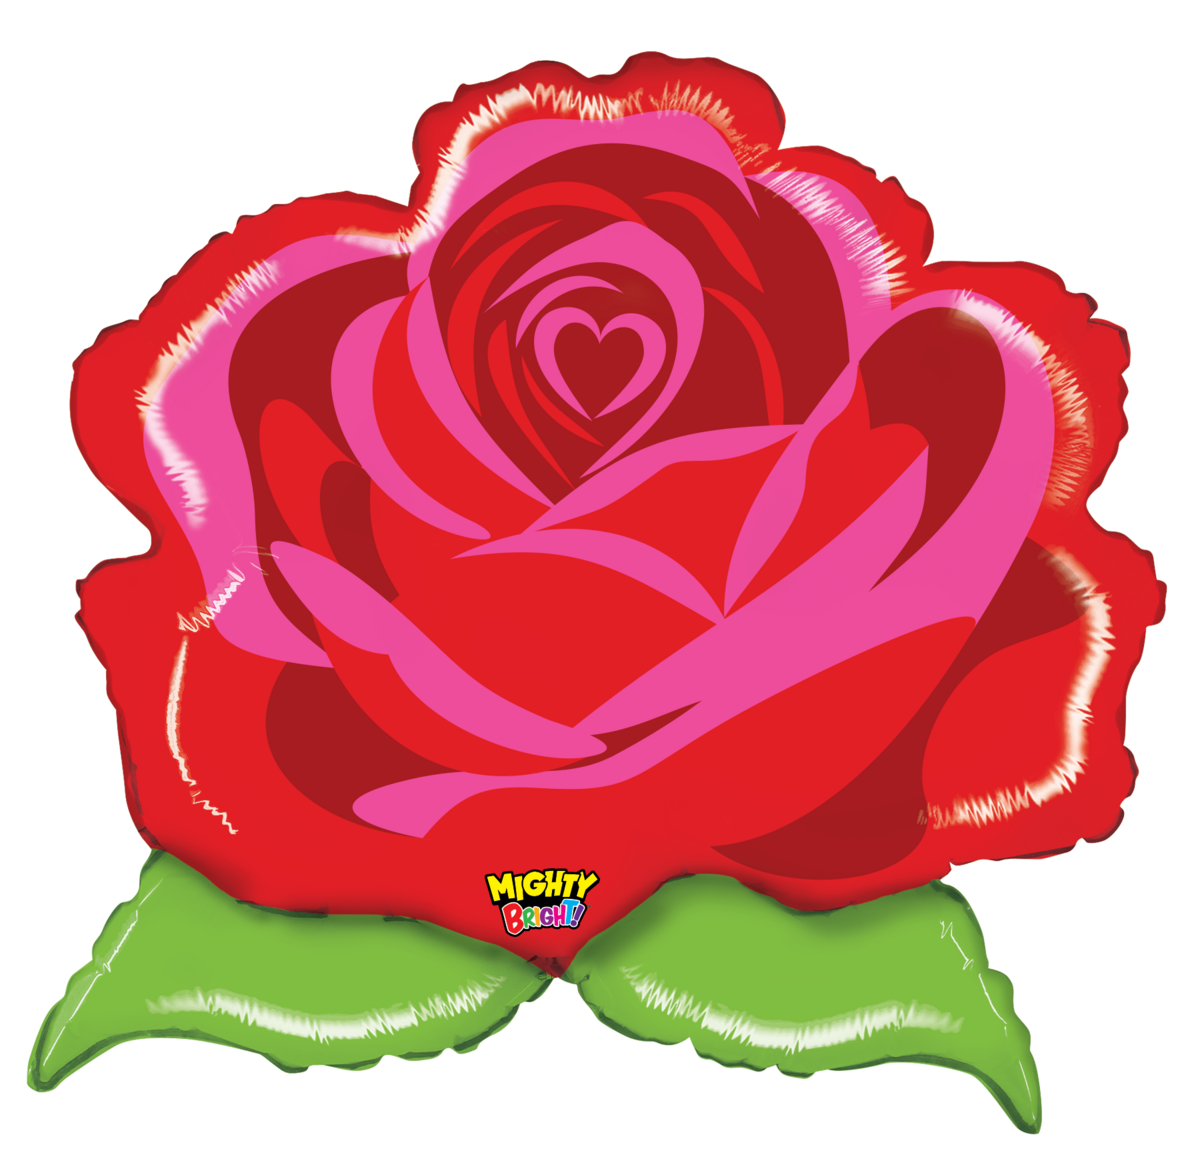 35512_MightyRose1200x1200.png